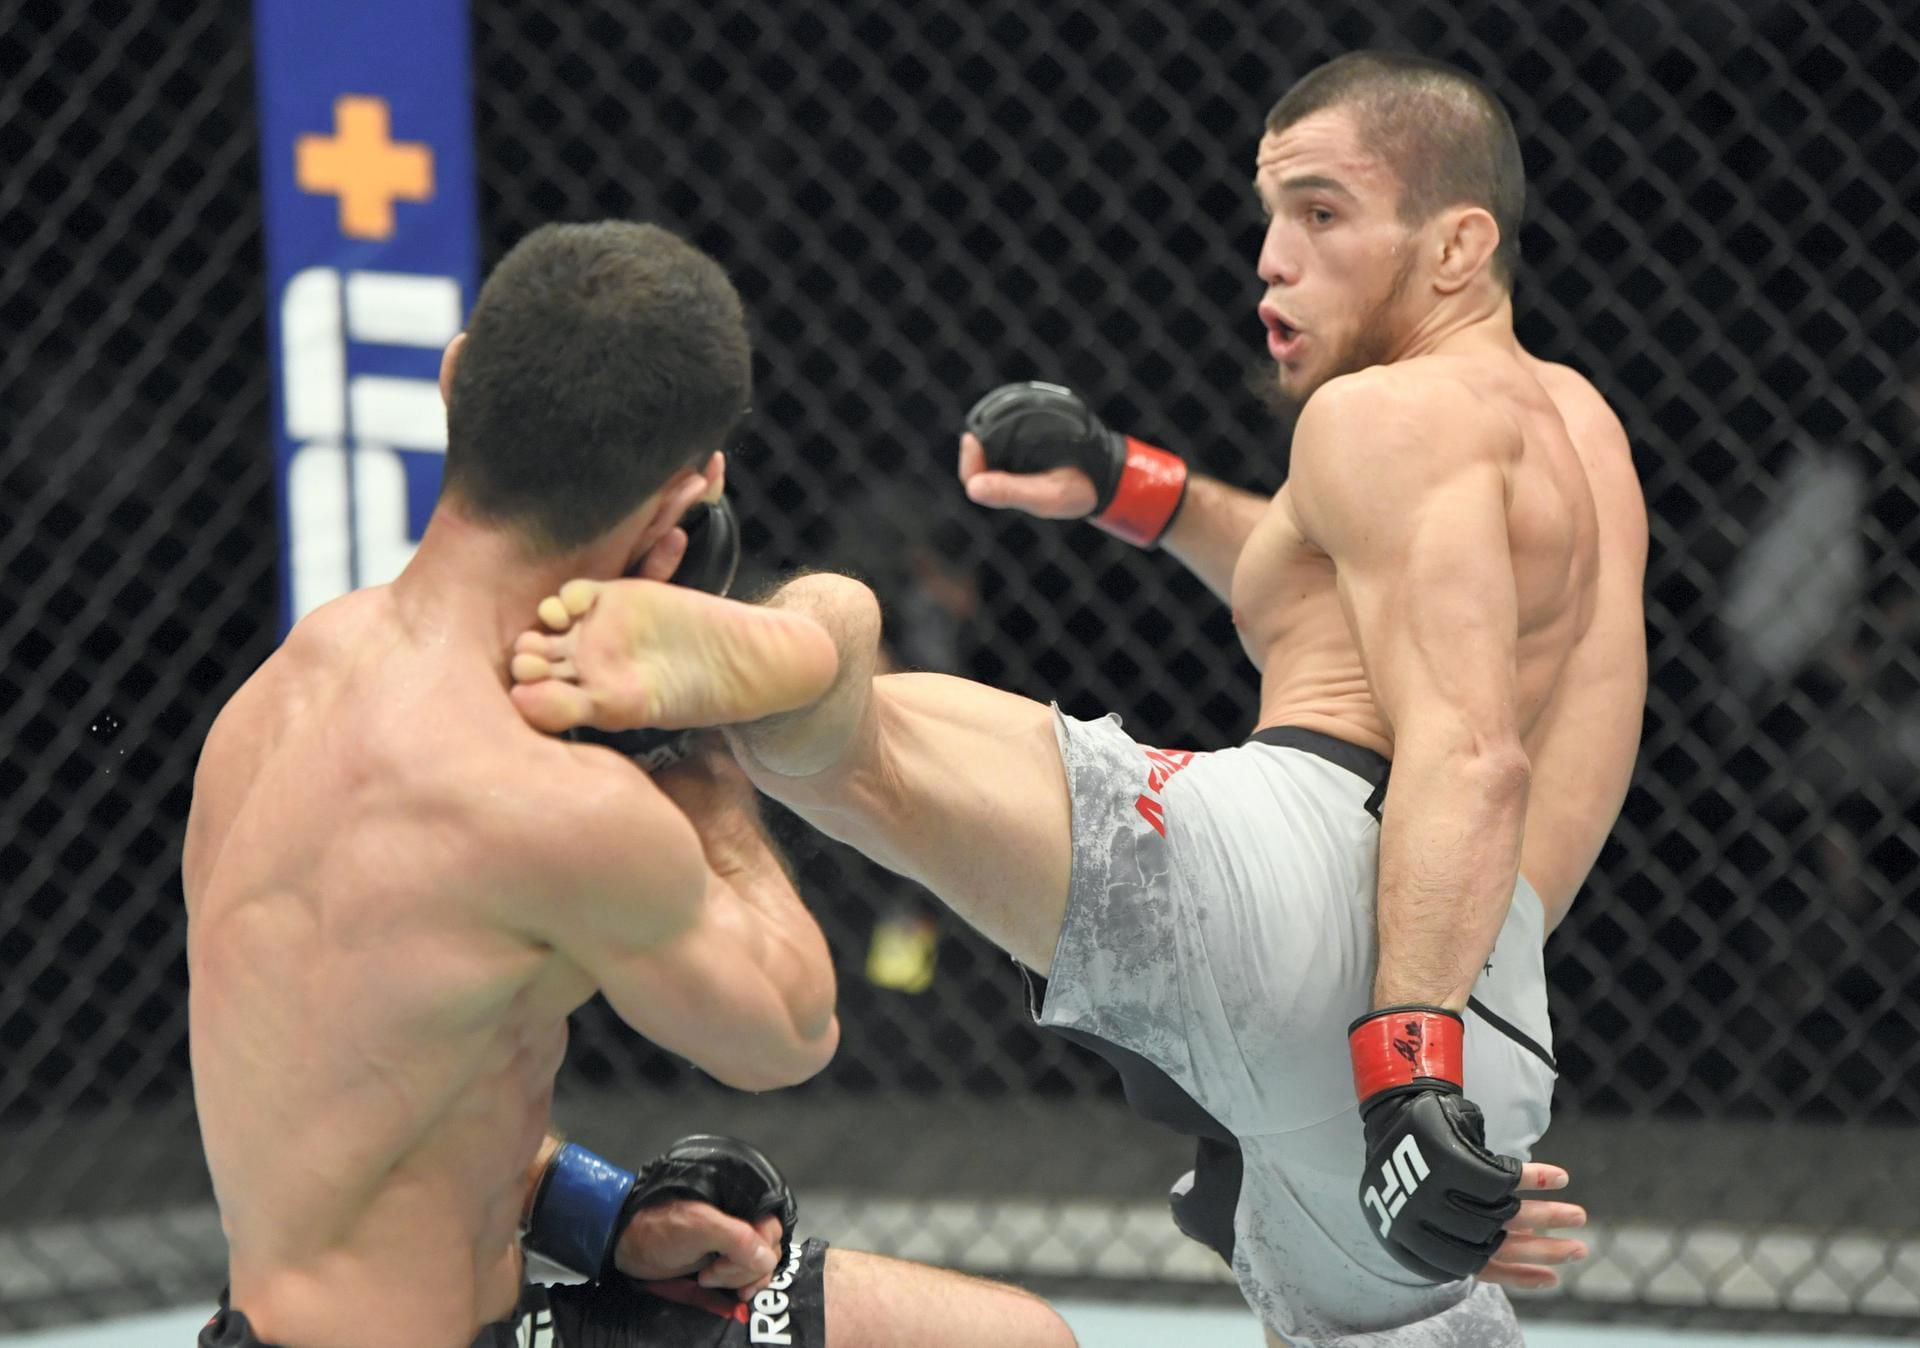 sandhagen and nurmagomedov confirmed as headline bout at fight night in abu dhabi